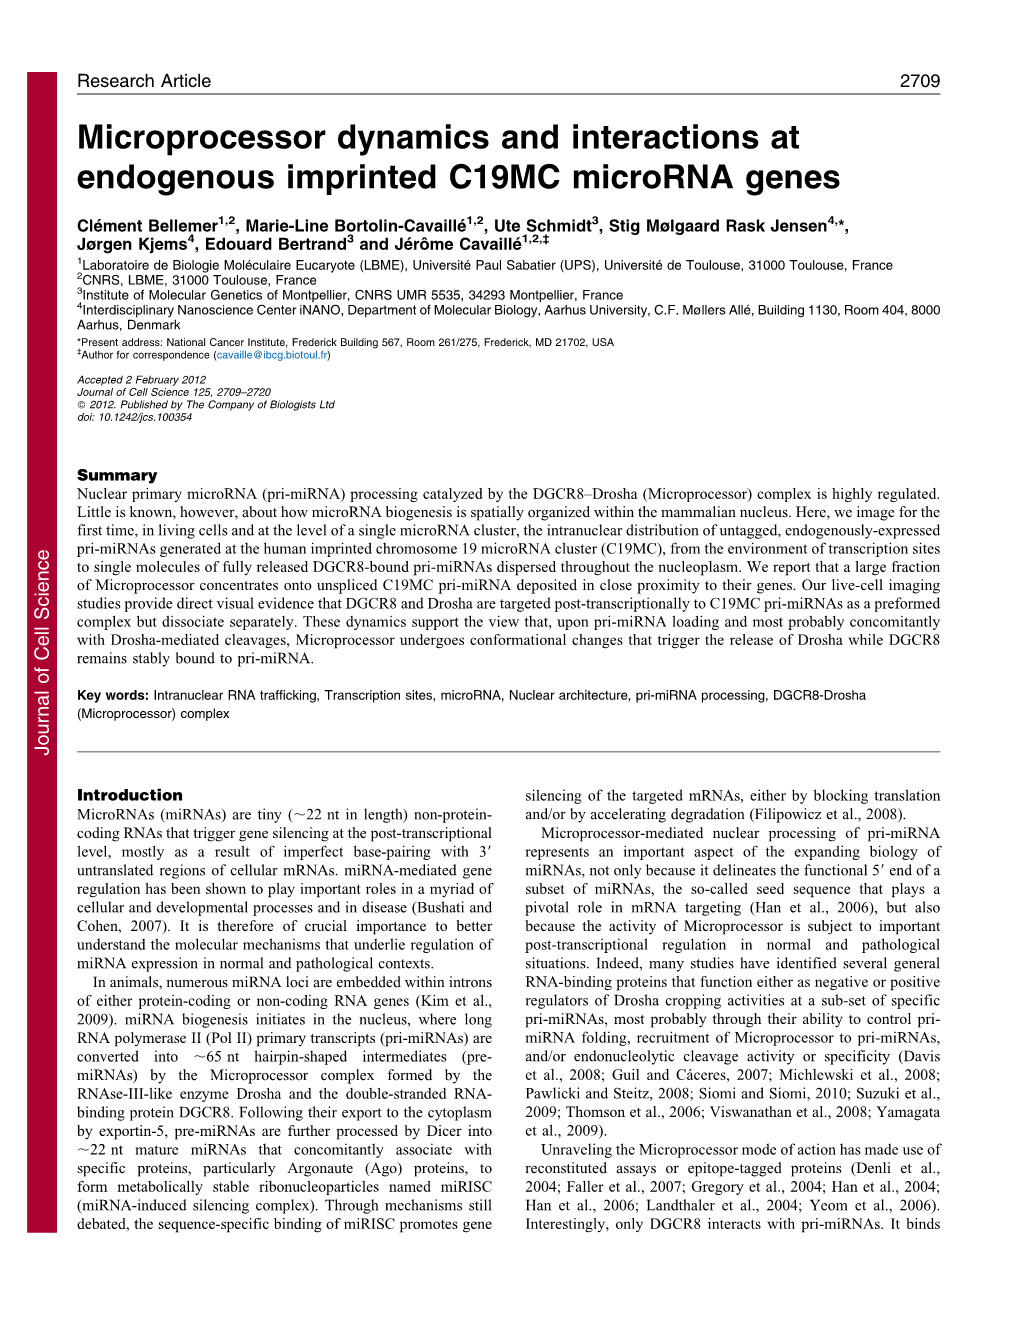 Microprocessor Dynamics and Interactions at Endogenous Imprinted C19MC Microrna Genes